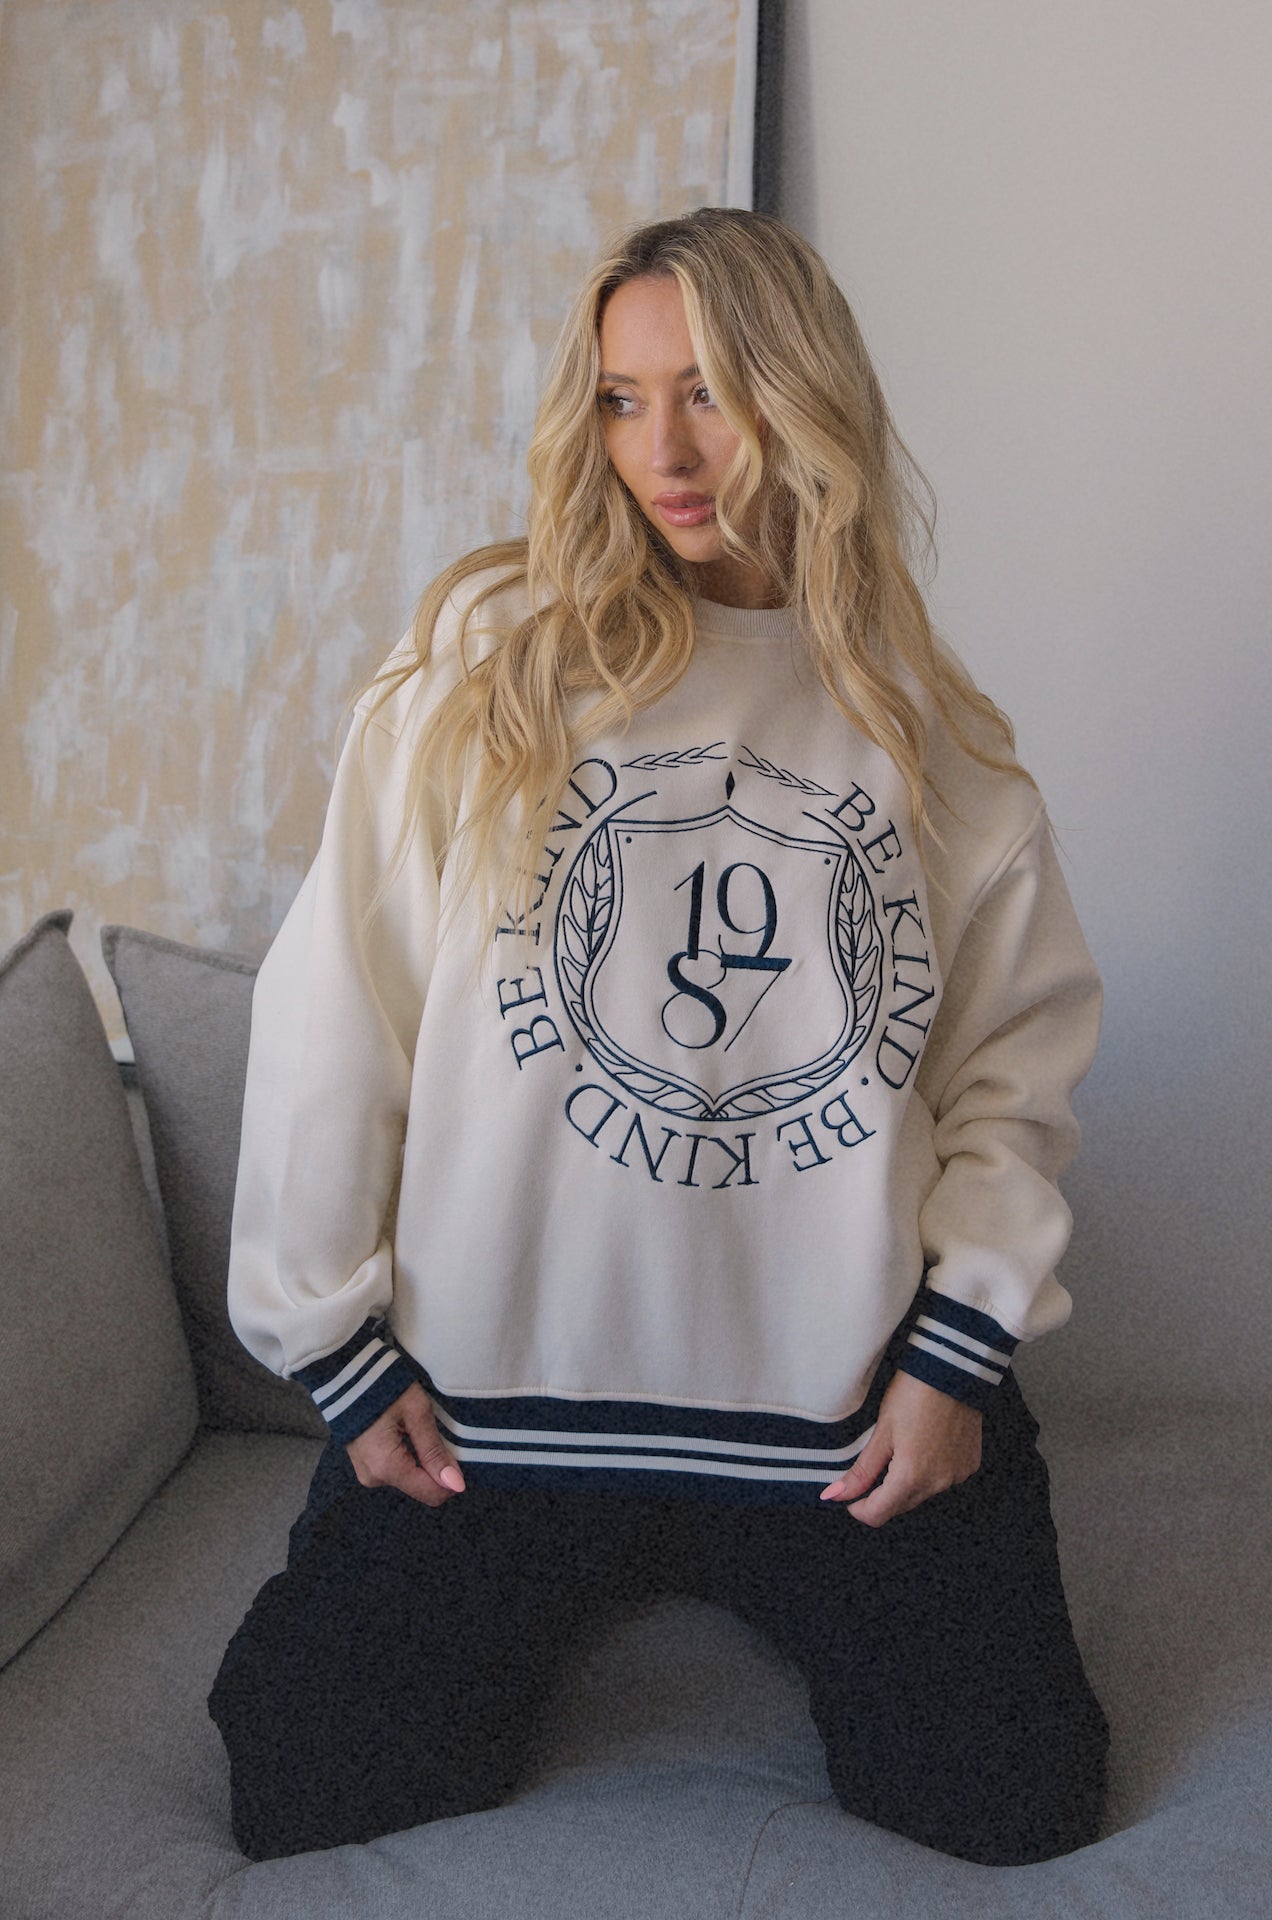 1987 be kind bailey rose sweatshirt in cream with blue embroidery